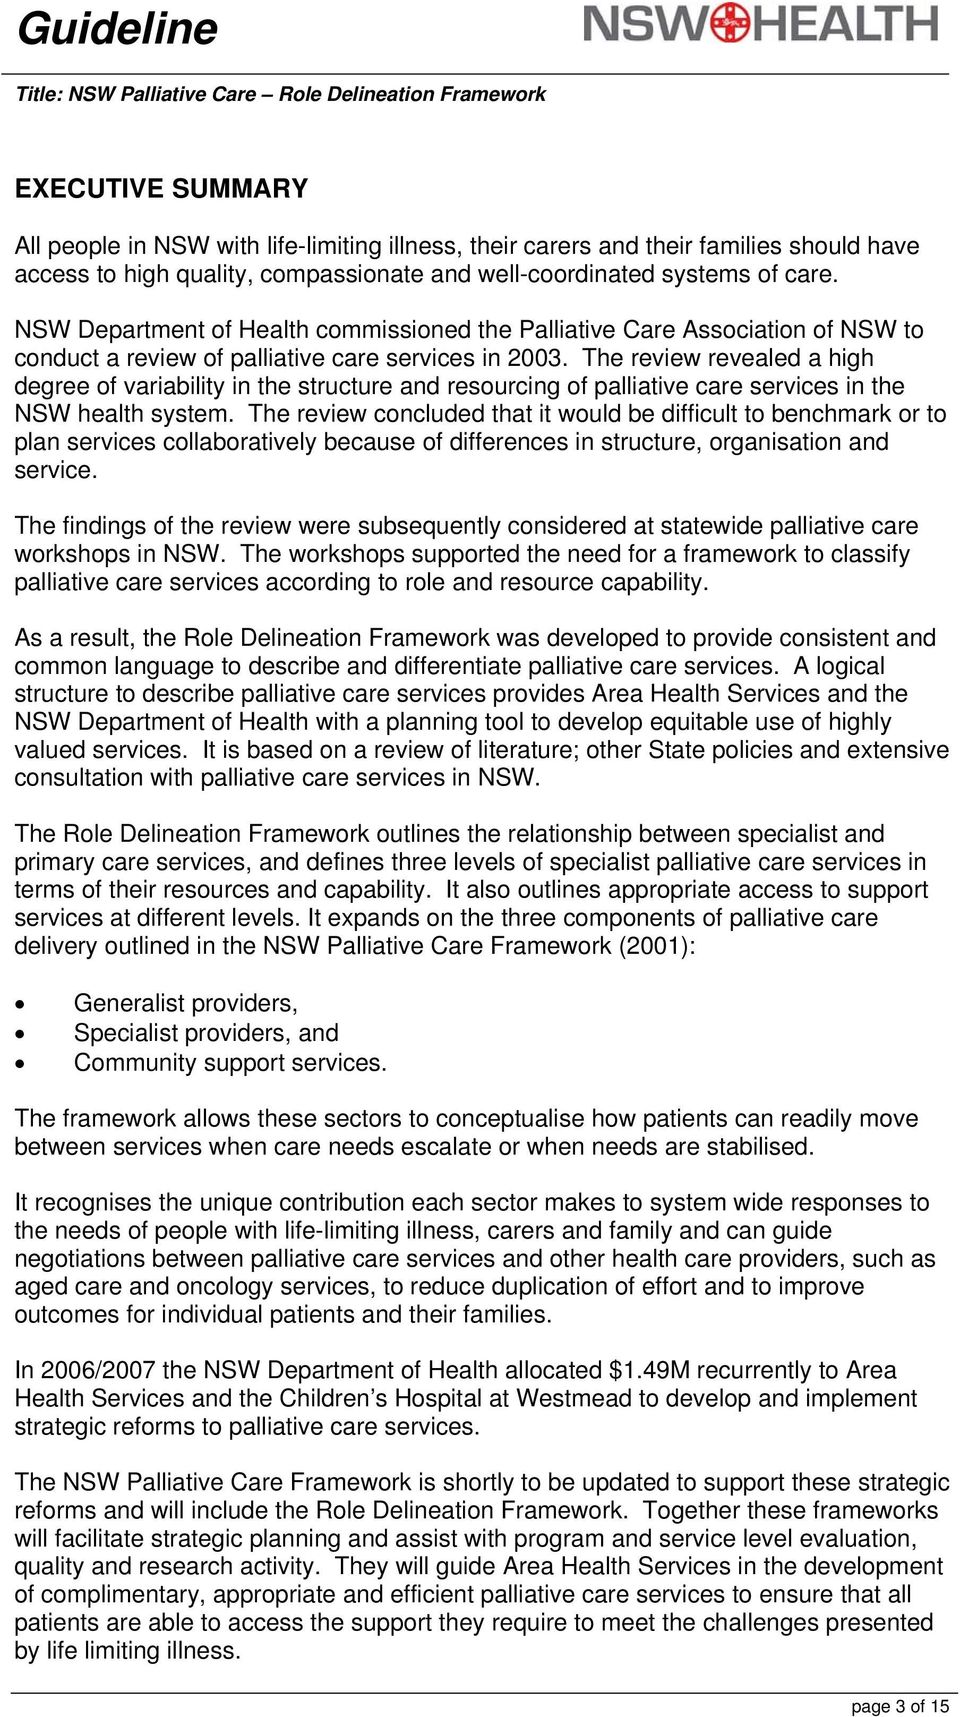 The review revealed a high degree of variability in the structure and resourcing of palliative care services in the NSW health system.